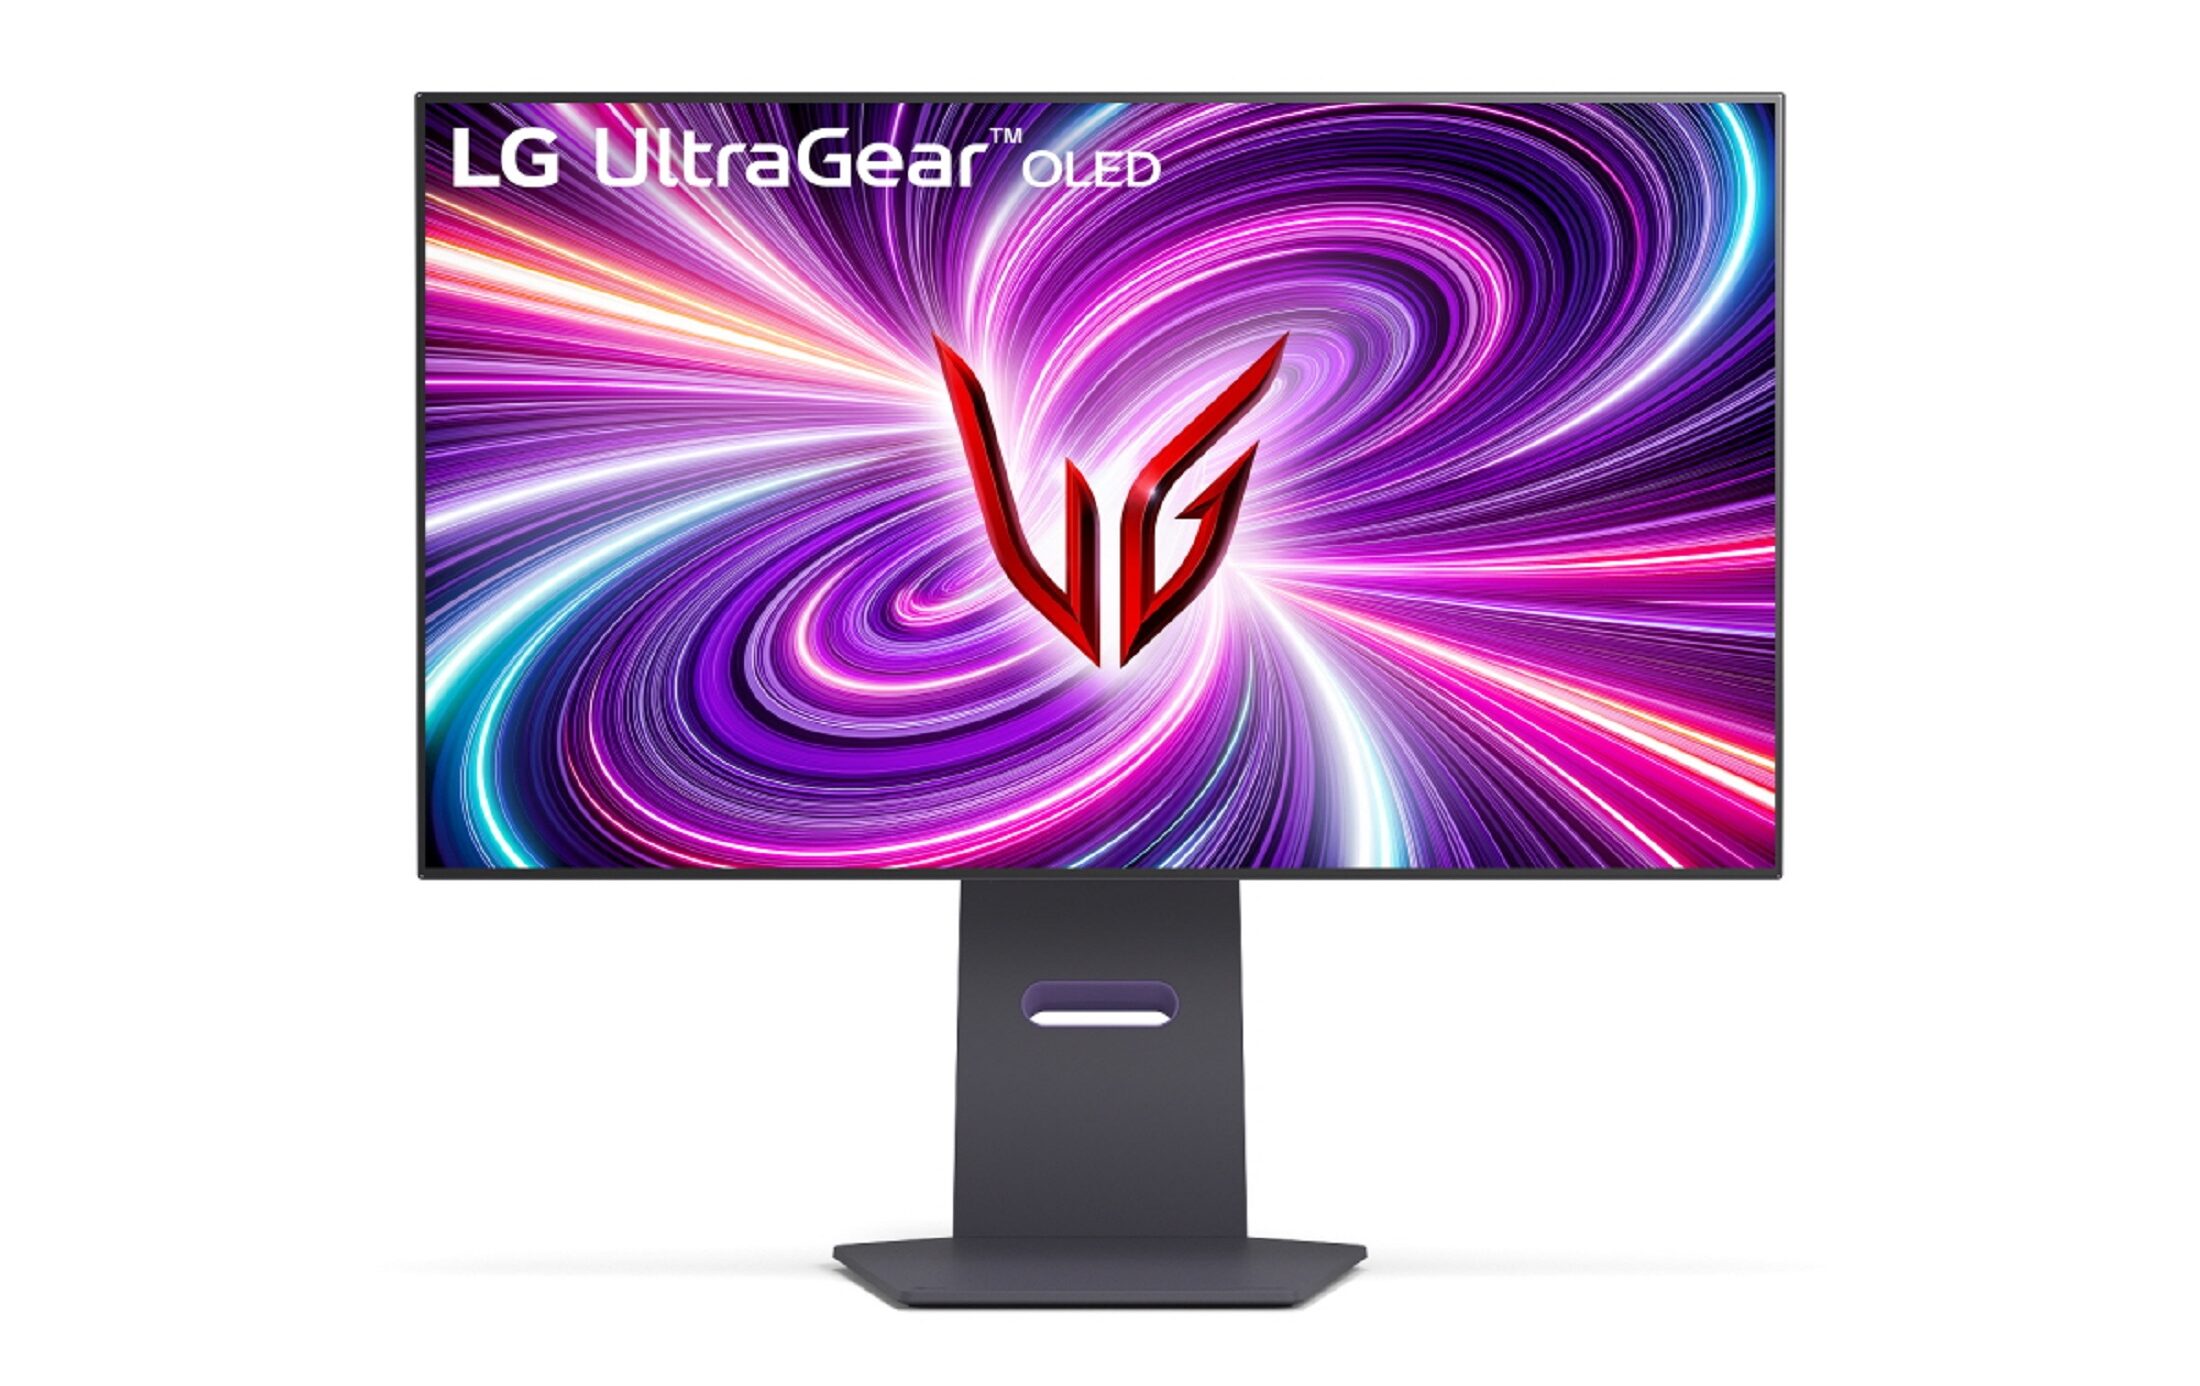 Introducing LG UltraGear: The First 4K OLED Gaming Monitor with Dual-Hz Feature